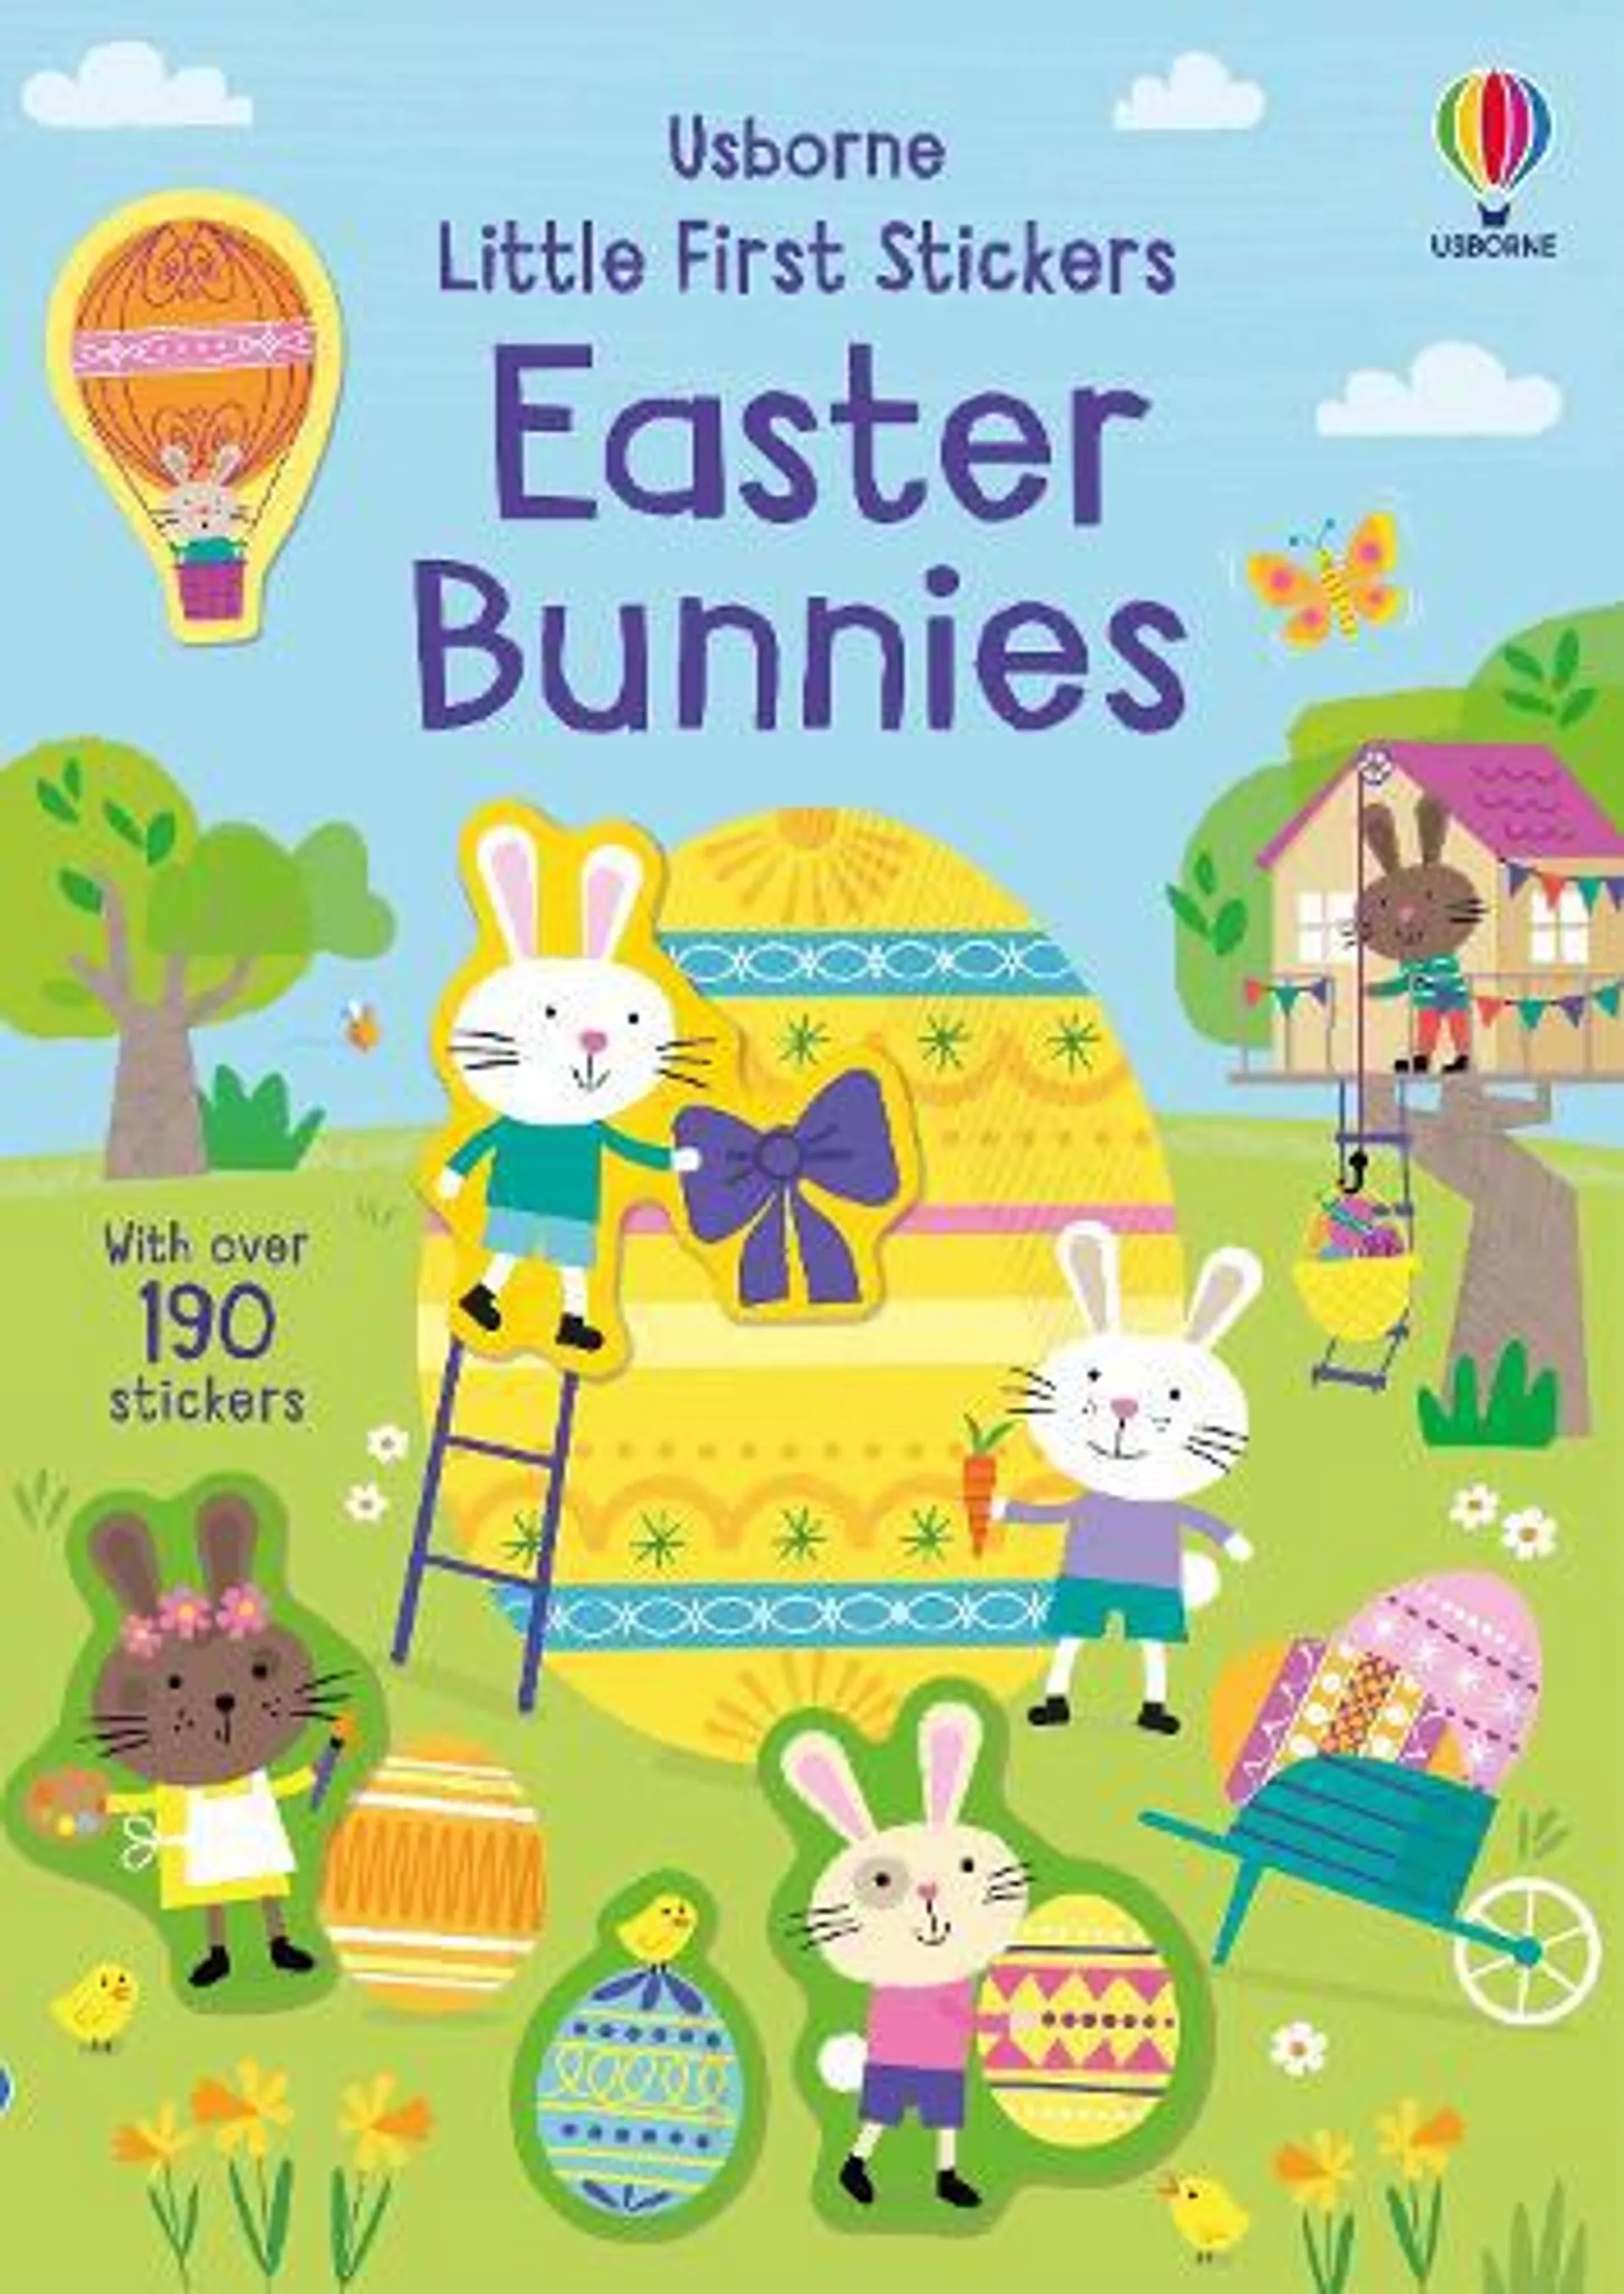 Little First Sticker Book Easter Bunnies: An Easter And Springtime Book For Children - Little First Stickers (Paperback)